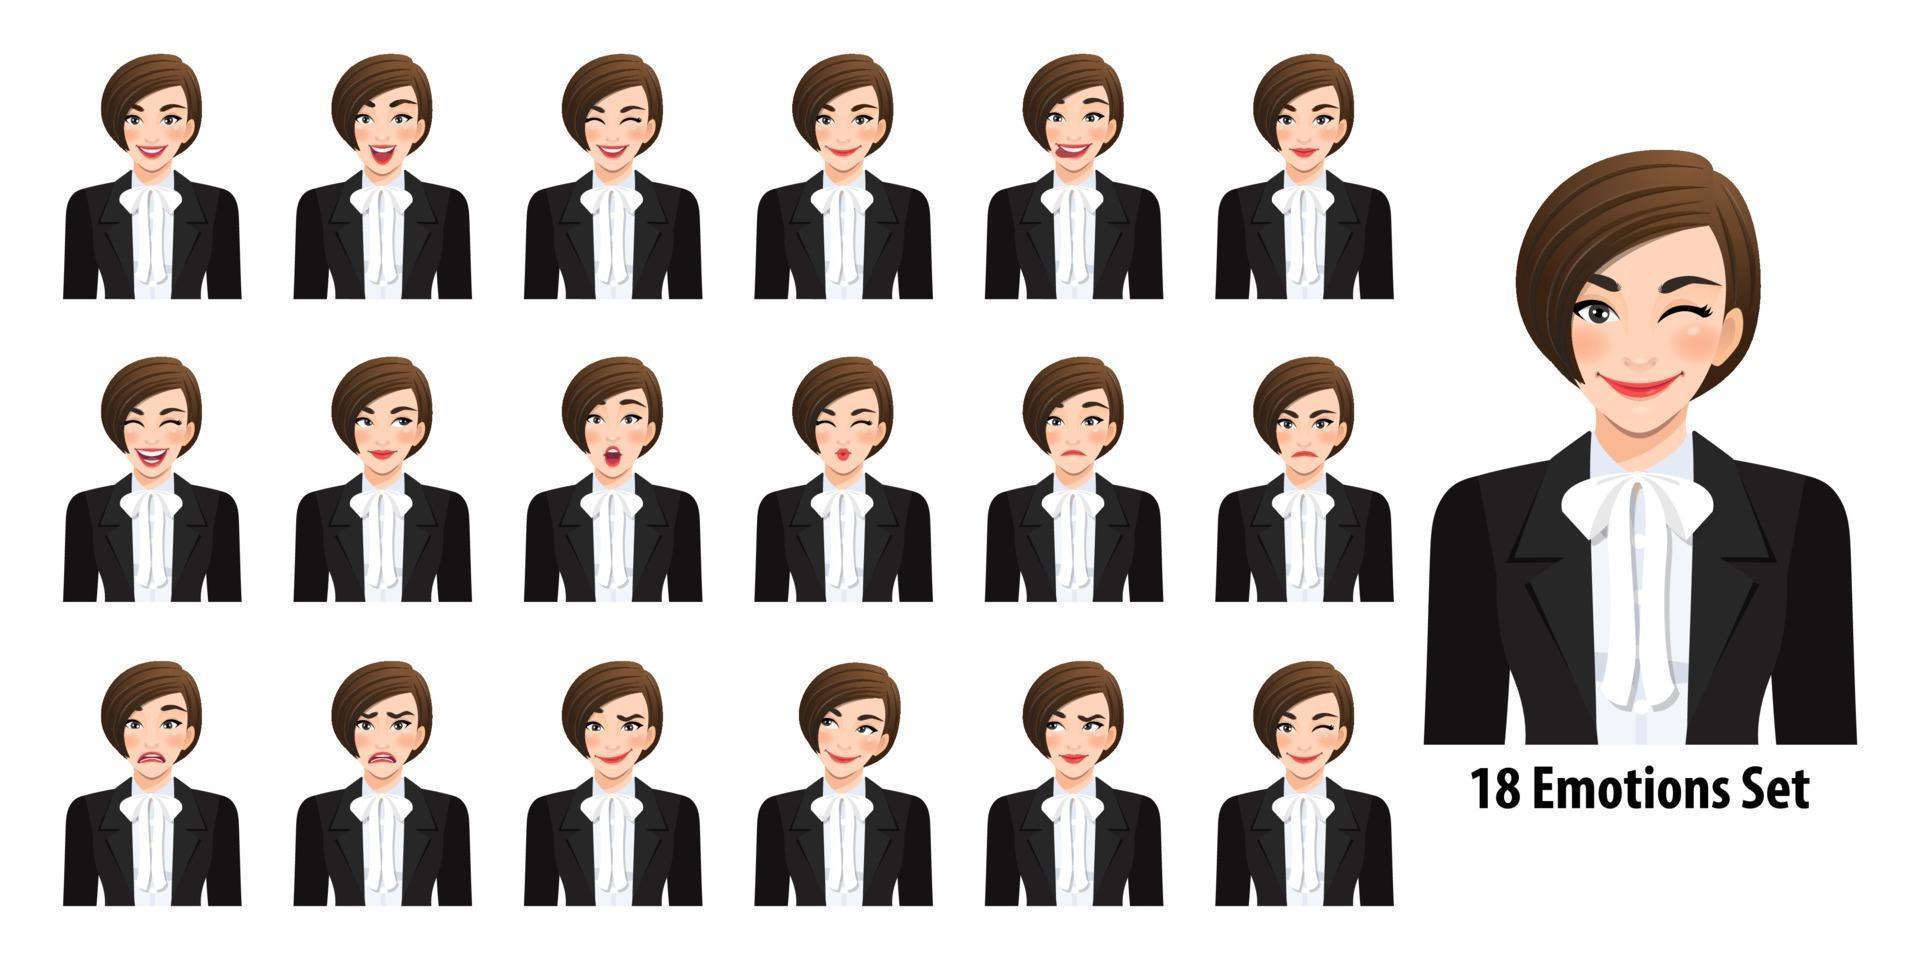 Beautiful businesswoman in black suit with different facial expressions set isolated in cartoon character style vector illustration